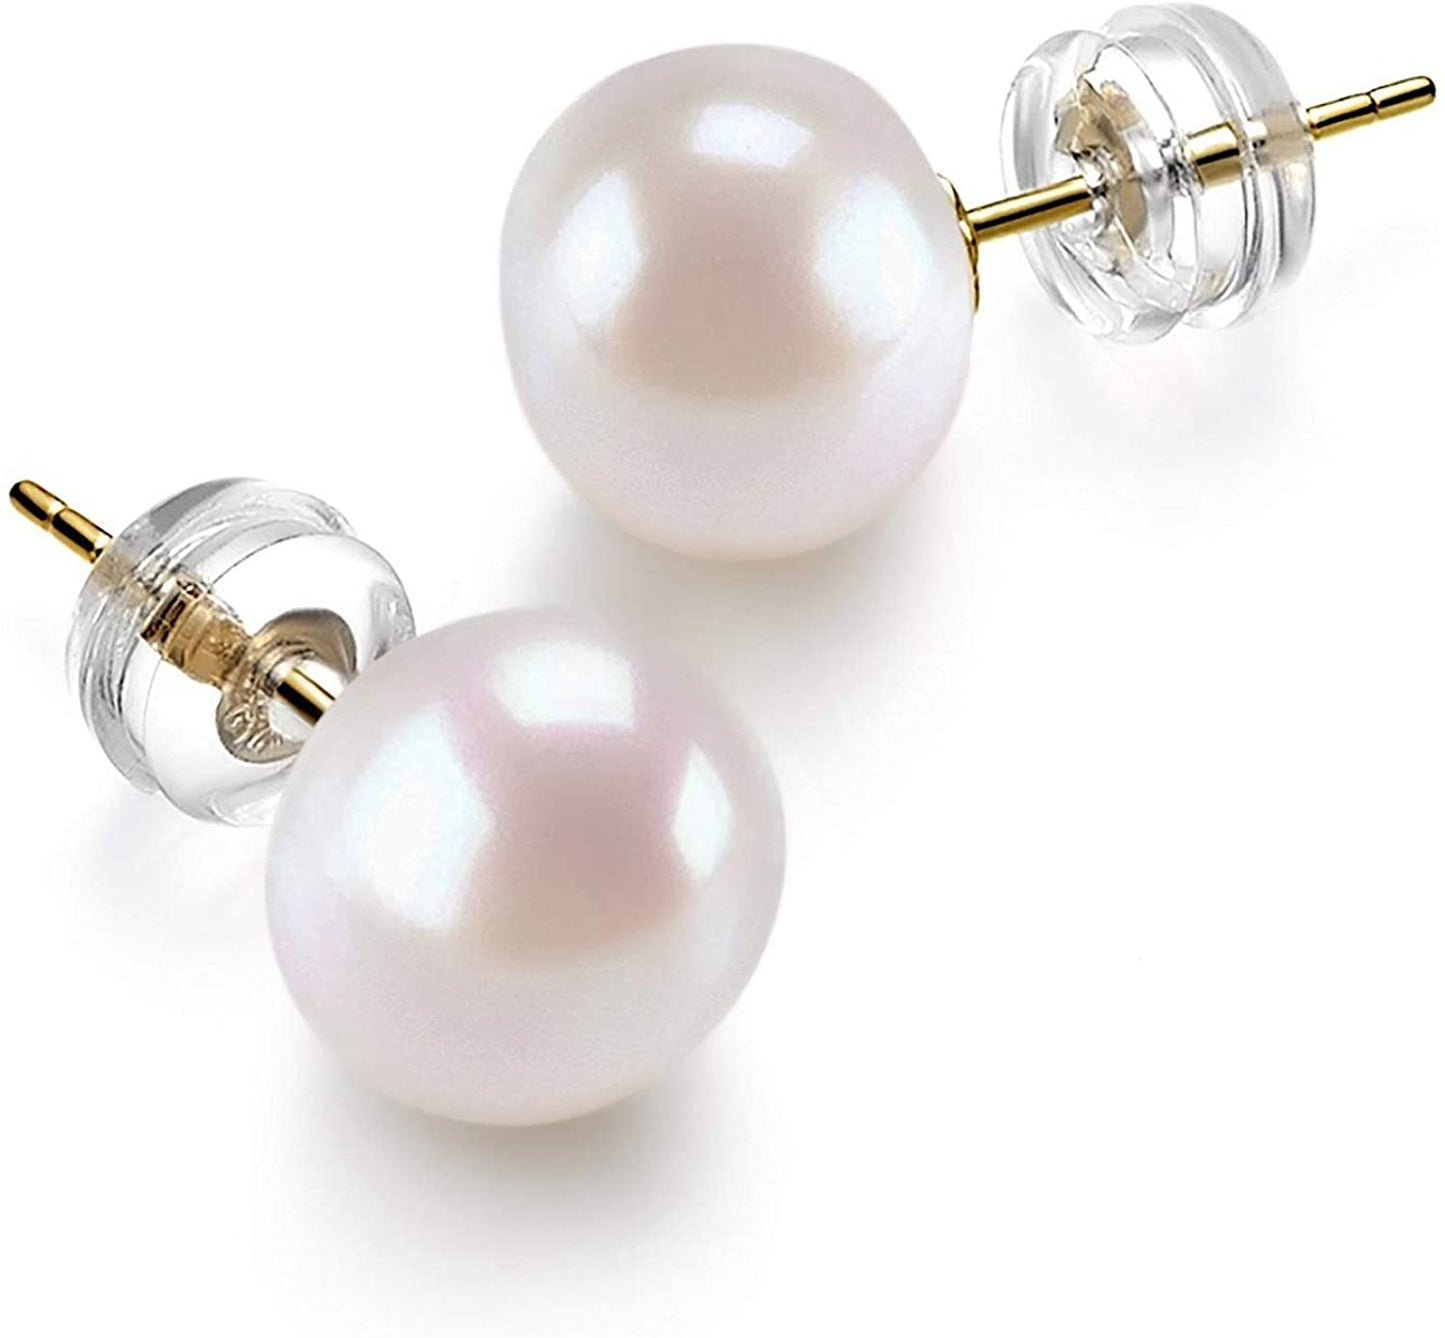 14K Gold AAA+ Handpicked White Freshwater Cultured Pearl Earrings Studs